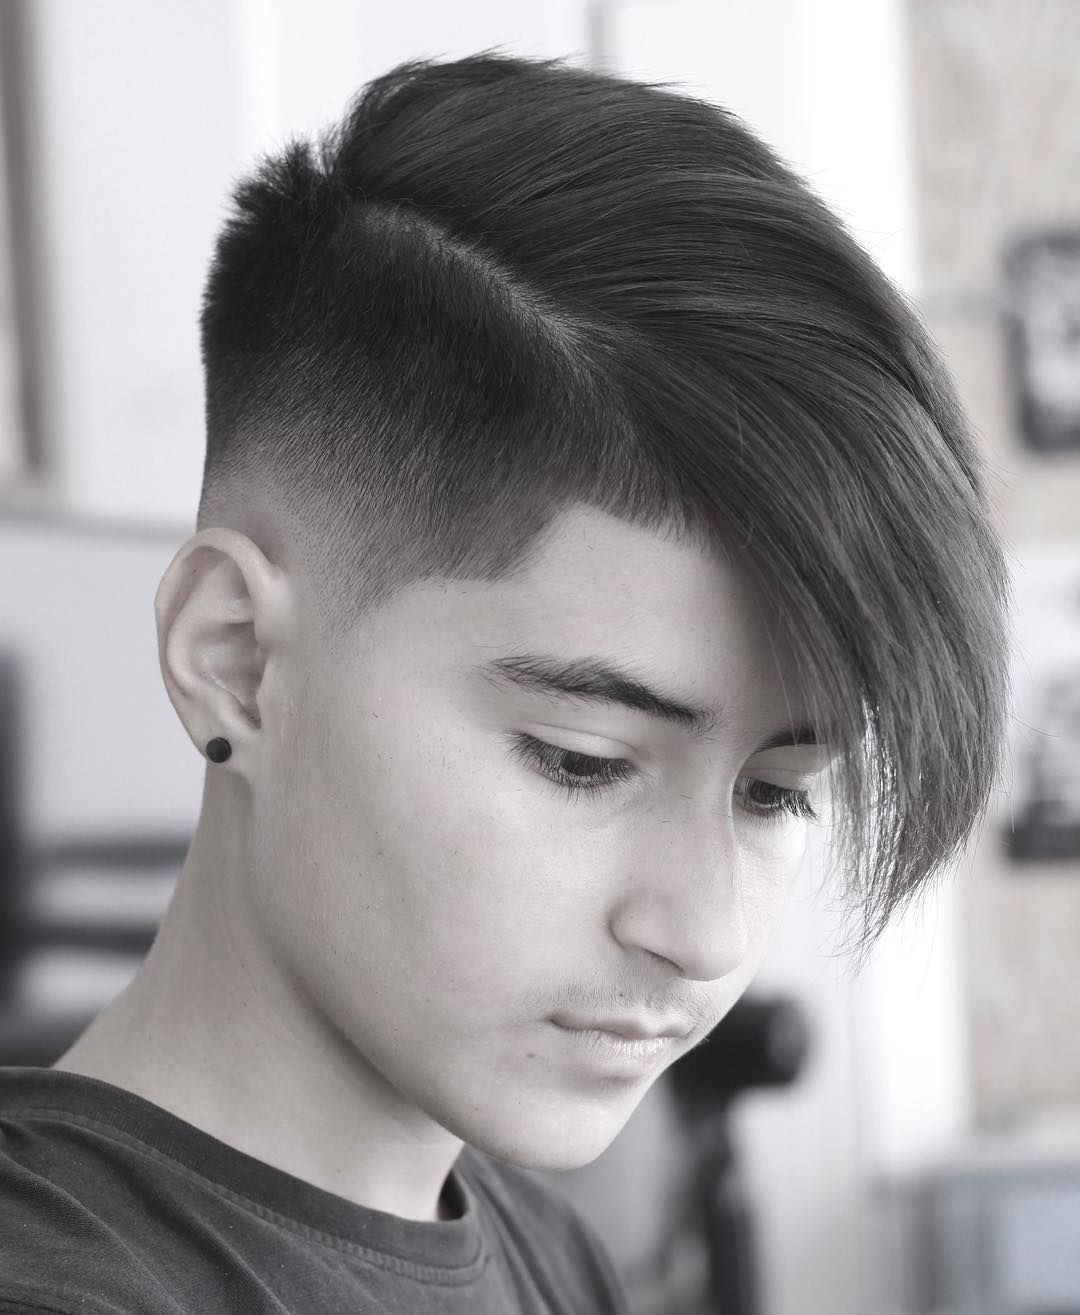 Men's Hair, Haircuts, Fade Haircuts, Short, Medium, Long, Buzzed Intended For Well Known Shaved Medium Hairstyles (View 19 of 20)